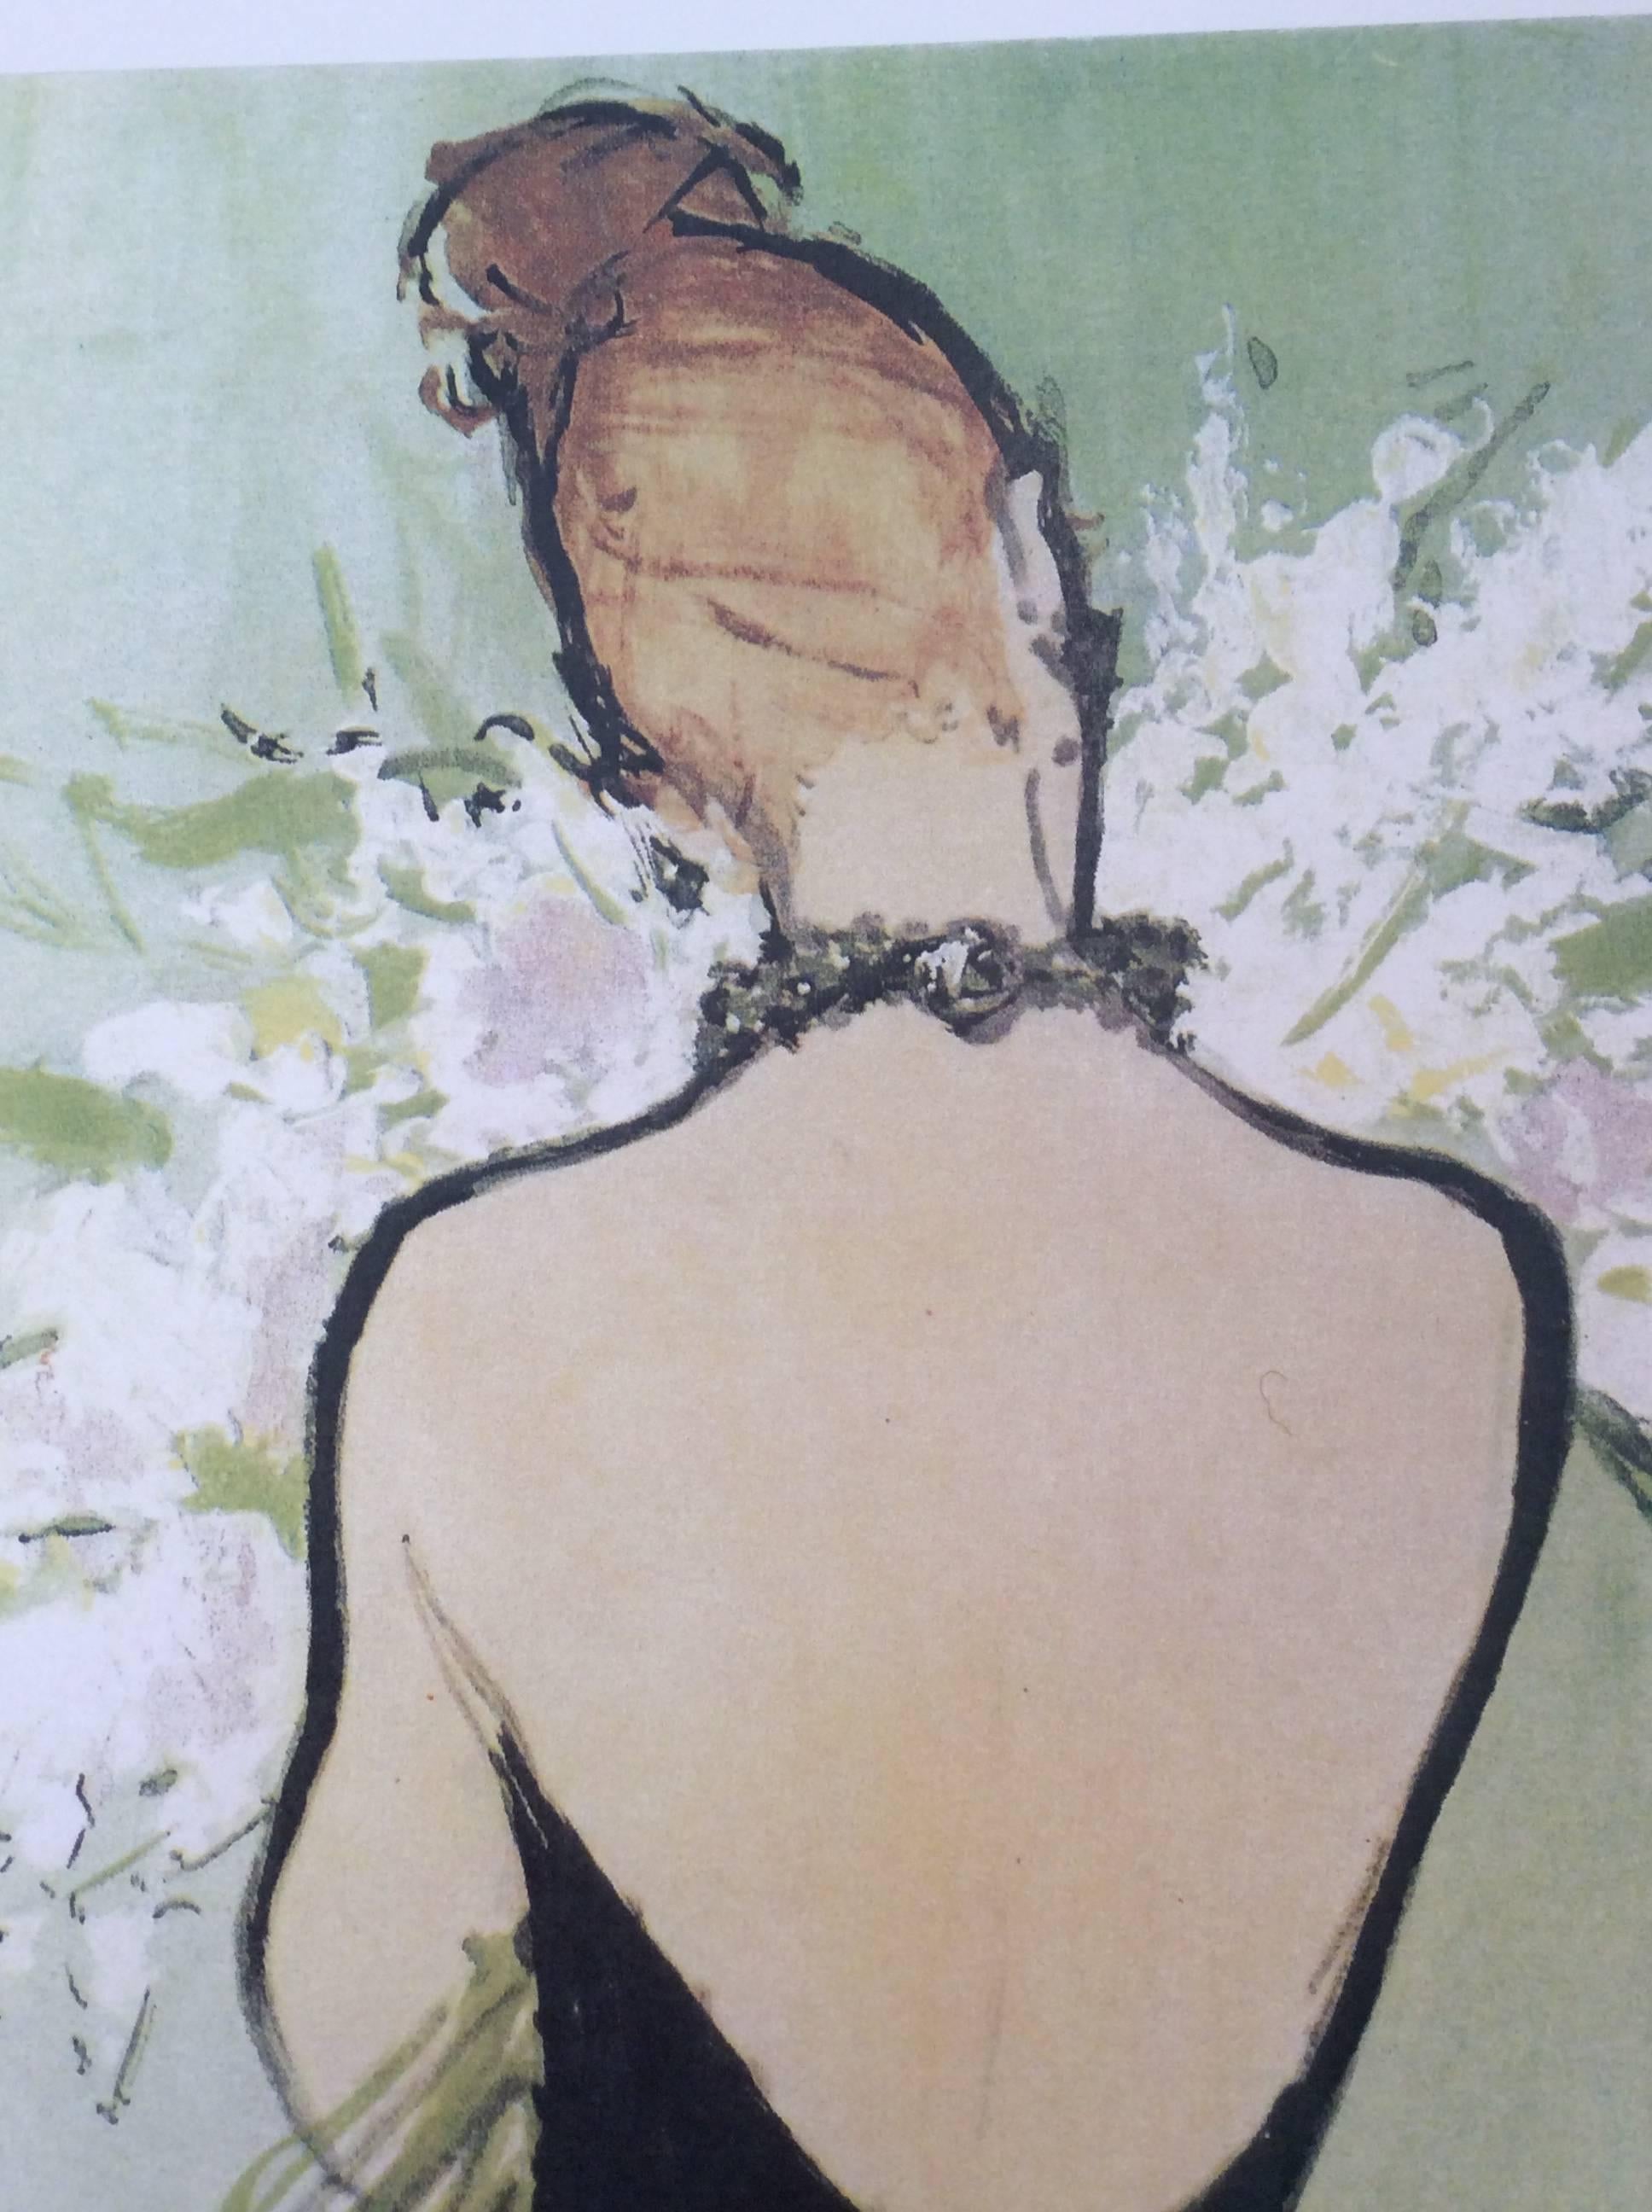 This rare Christian Dior ad print is a picture of a woman dressed in a black dress. She is showing her back to the viewer and appears to be holding something like a bouquet of flowers. A gorgeous picture set on a light green background. The ad is